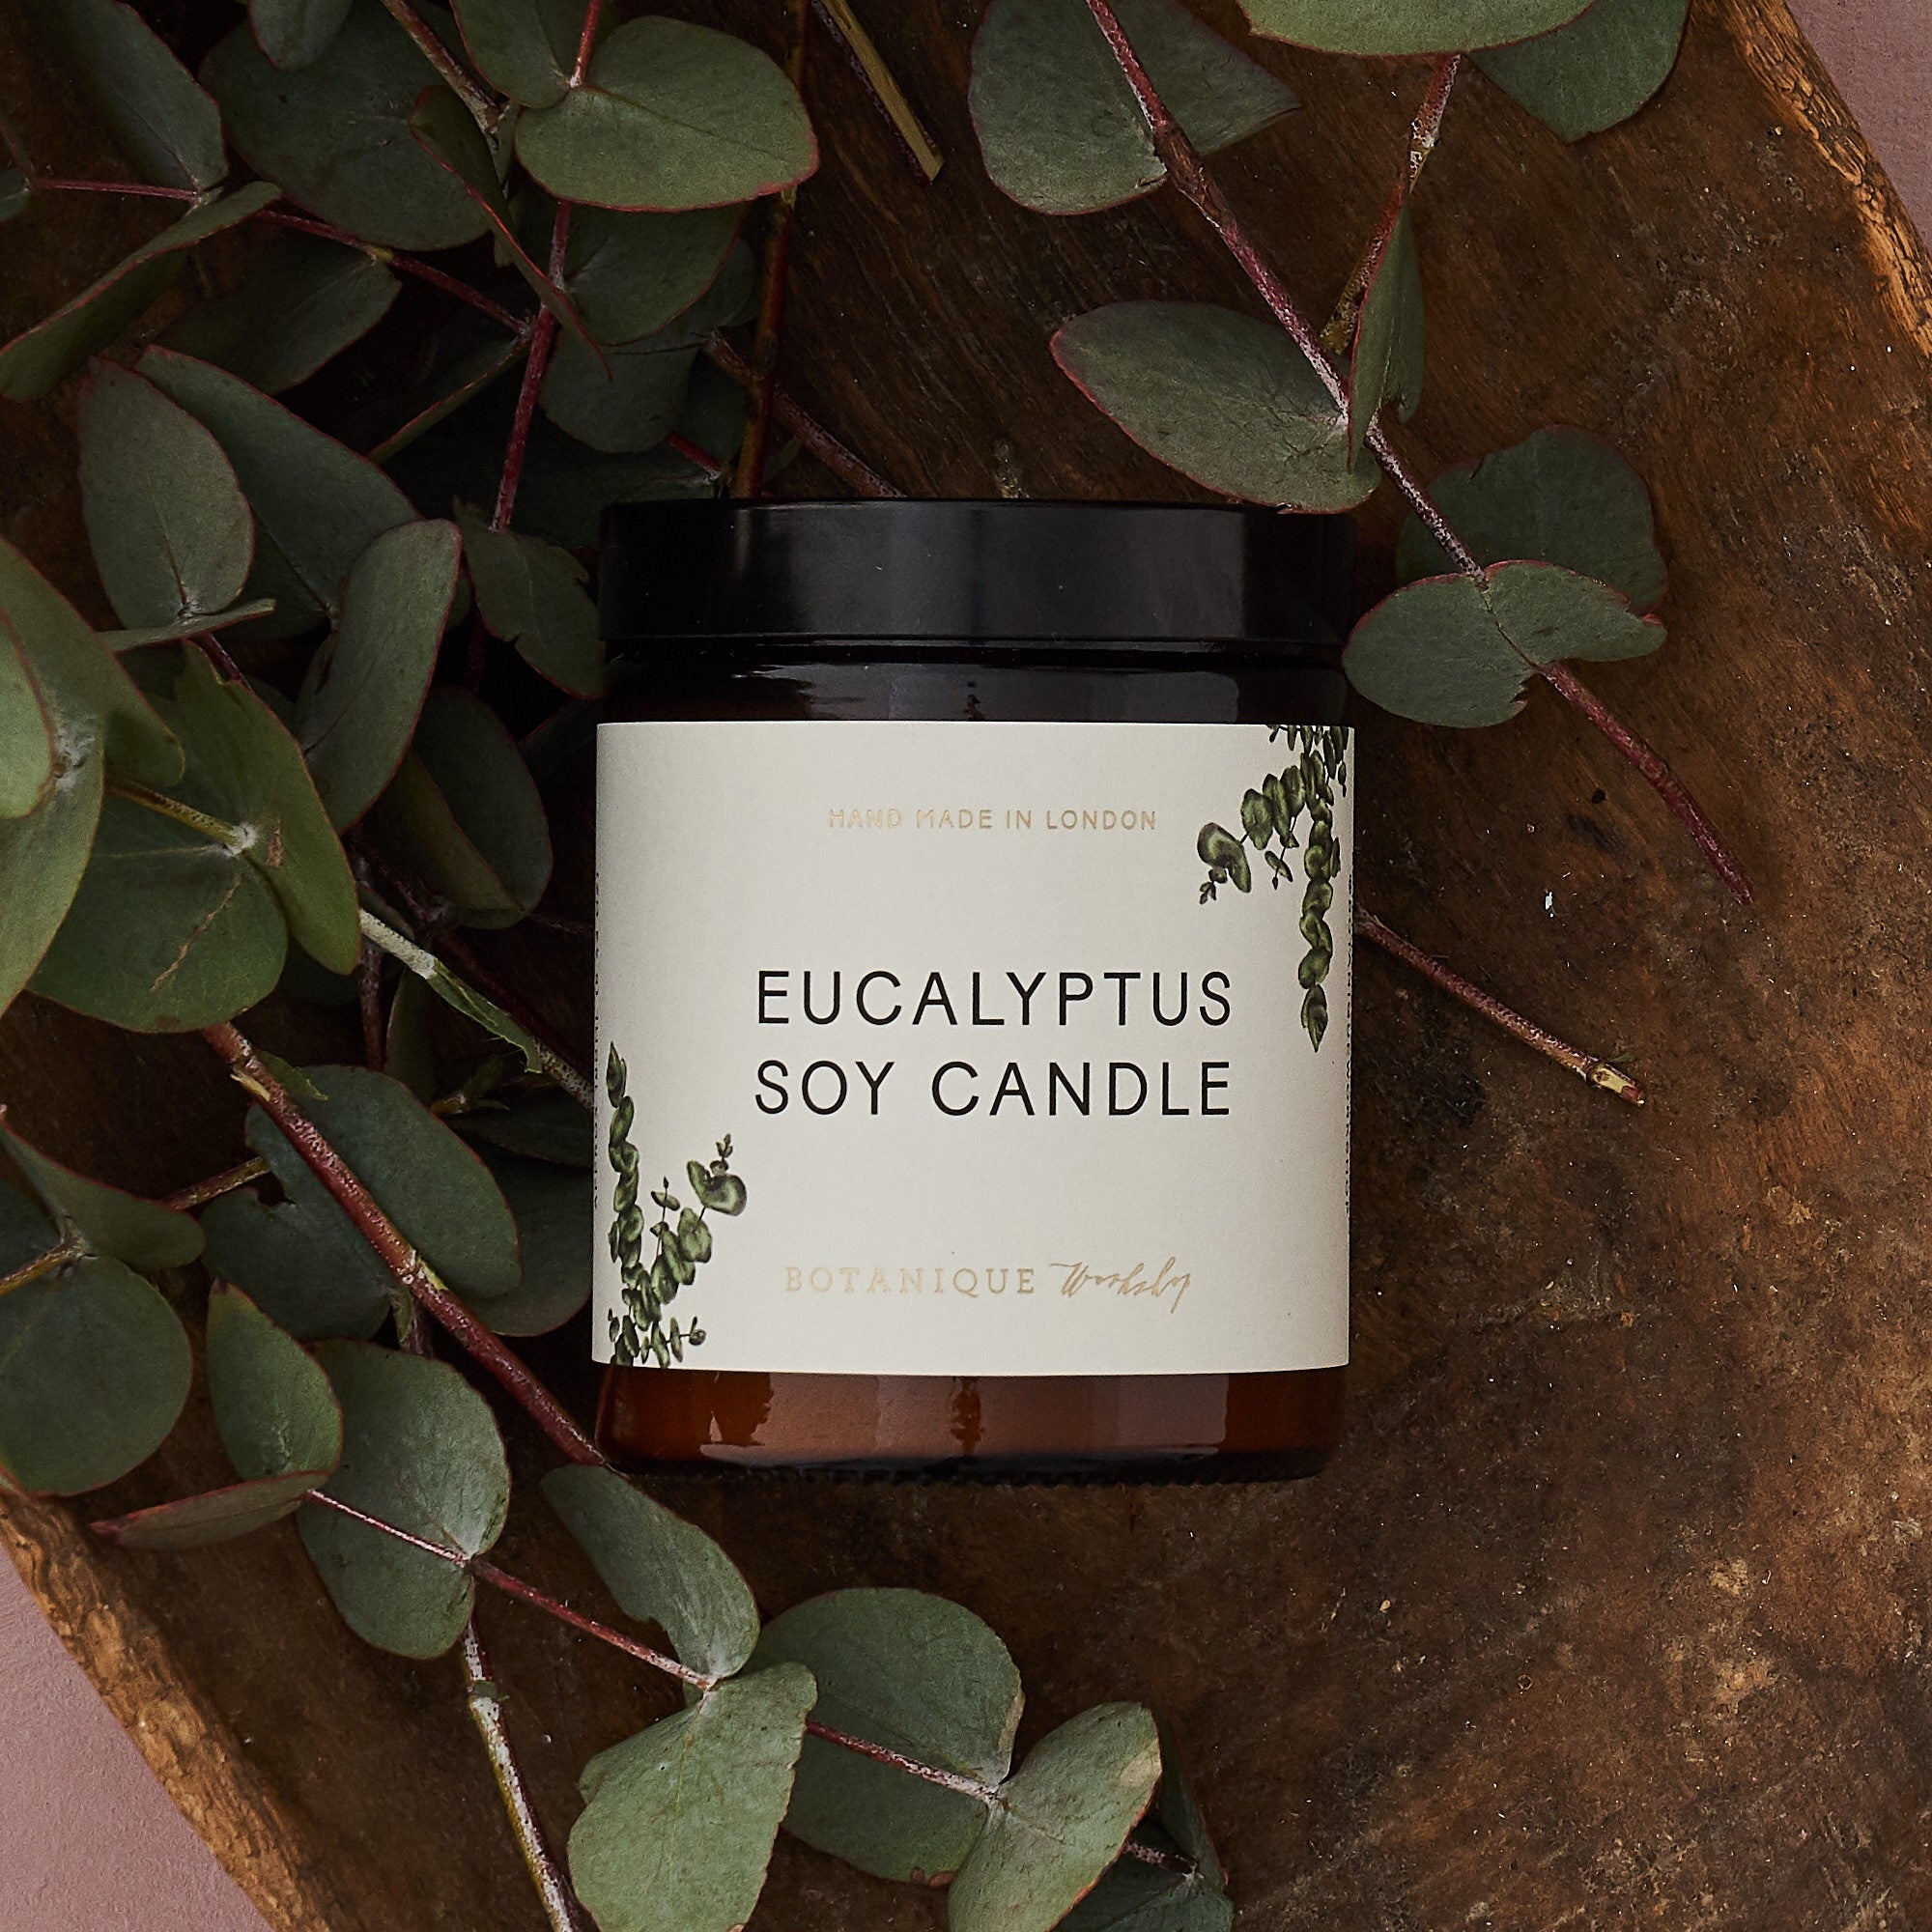 Hand-poured Eucalyptus scented Soy Candles